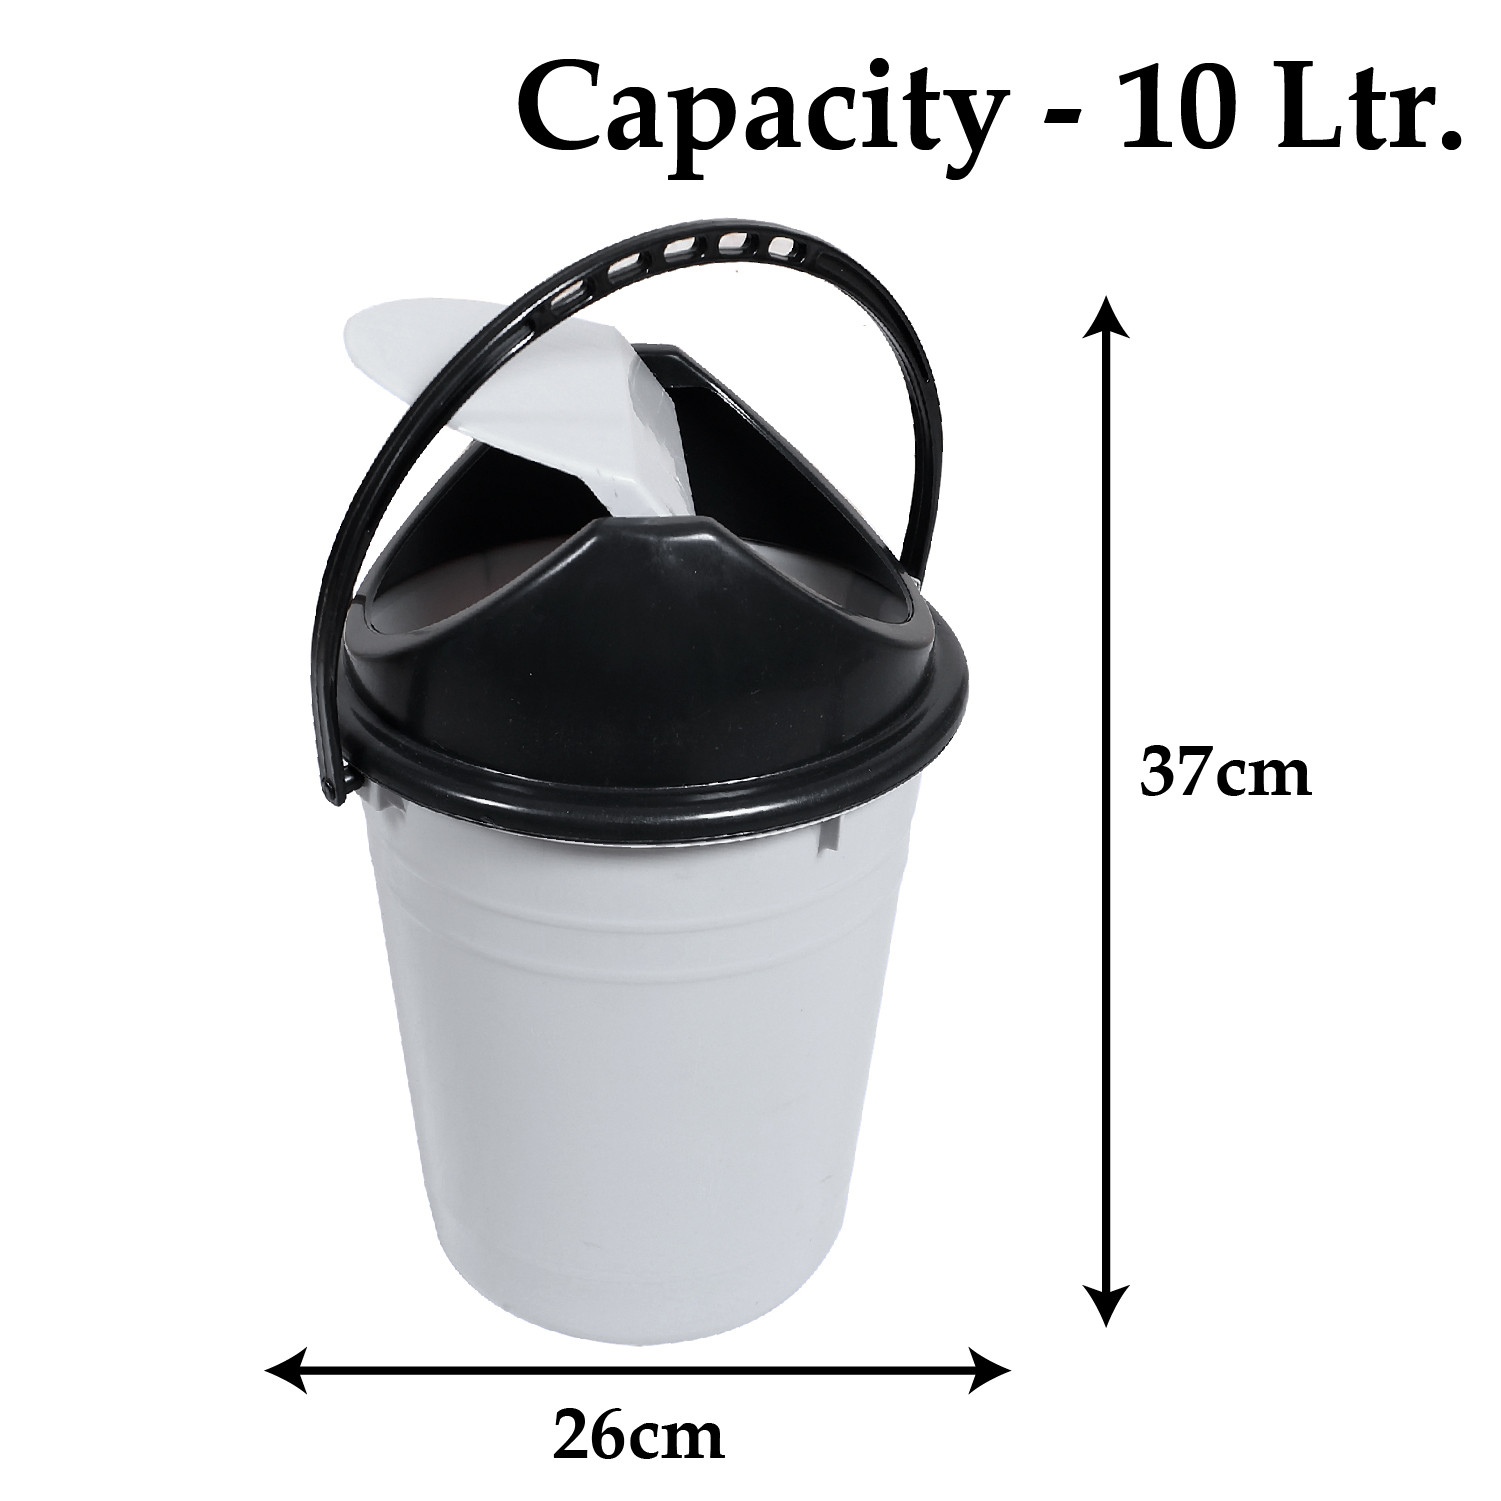 Kuber Industries Plastic Dustbin with Swinging Lid|Portable Garbage Basket & Round Trash Can for Home,Kitchen,Office,College,10 Ltr (Gray)